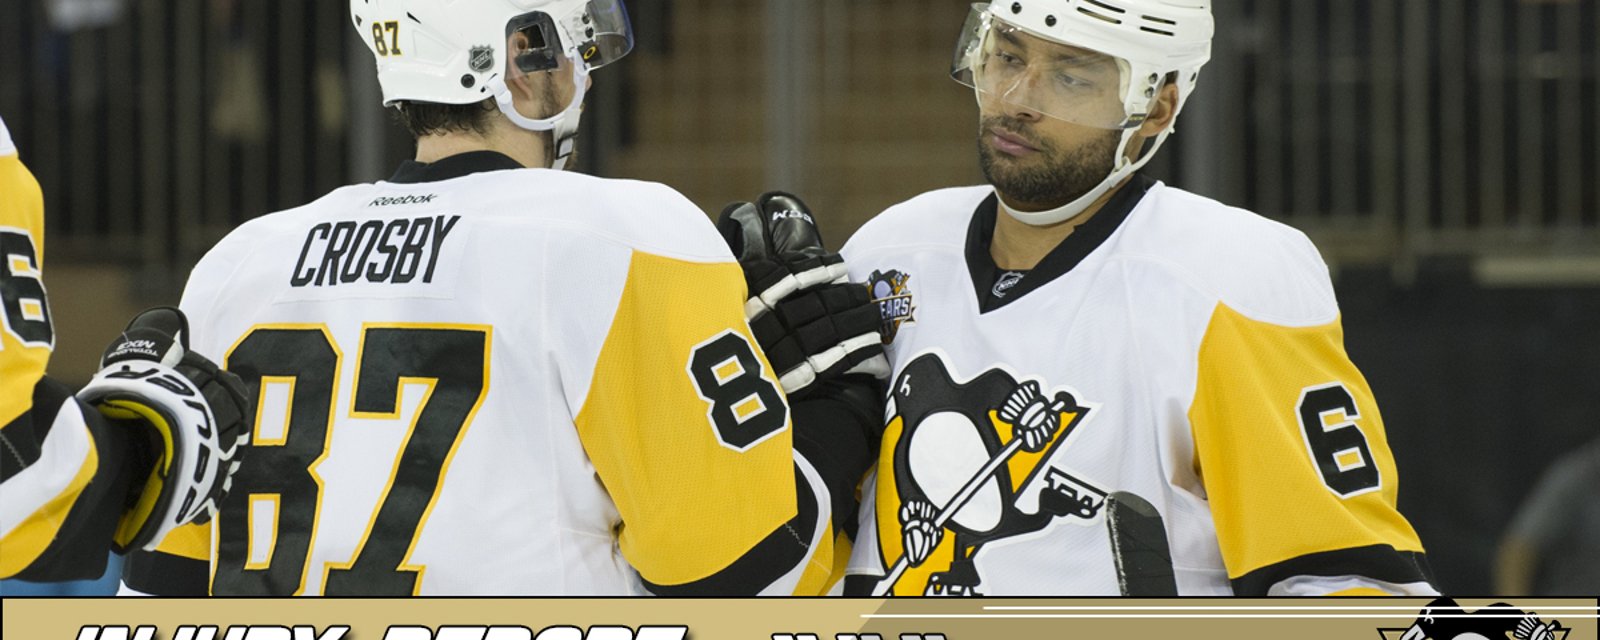 MAJOR injury could put pressure on the Penguins come game 1.